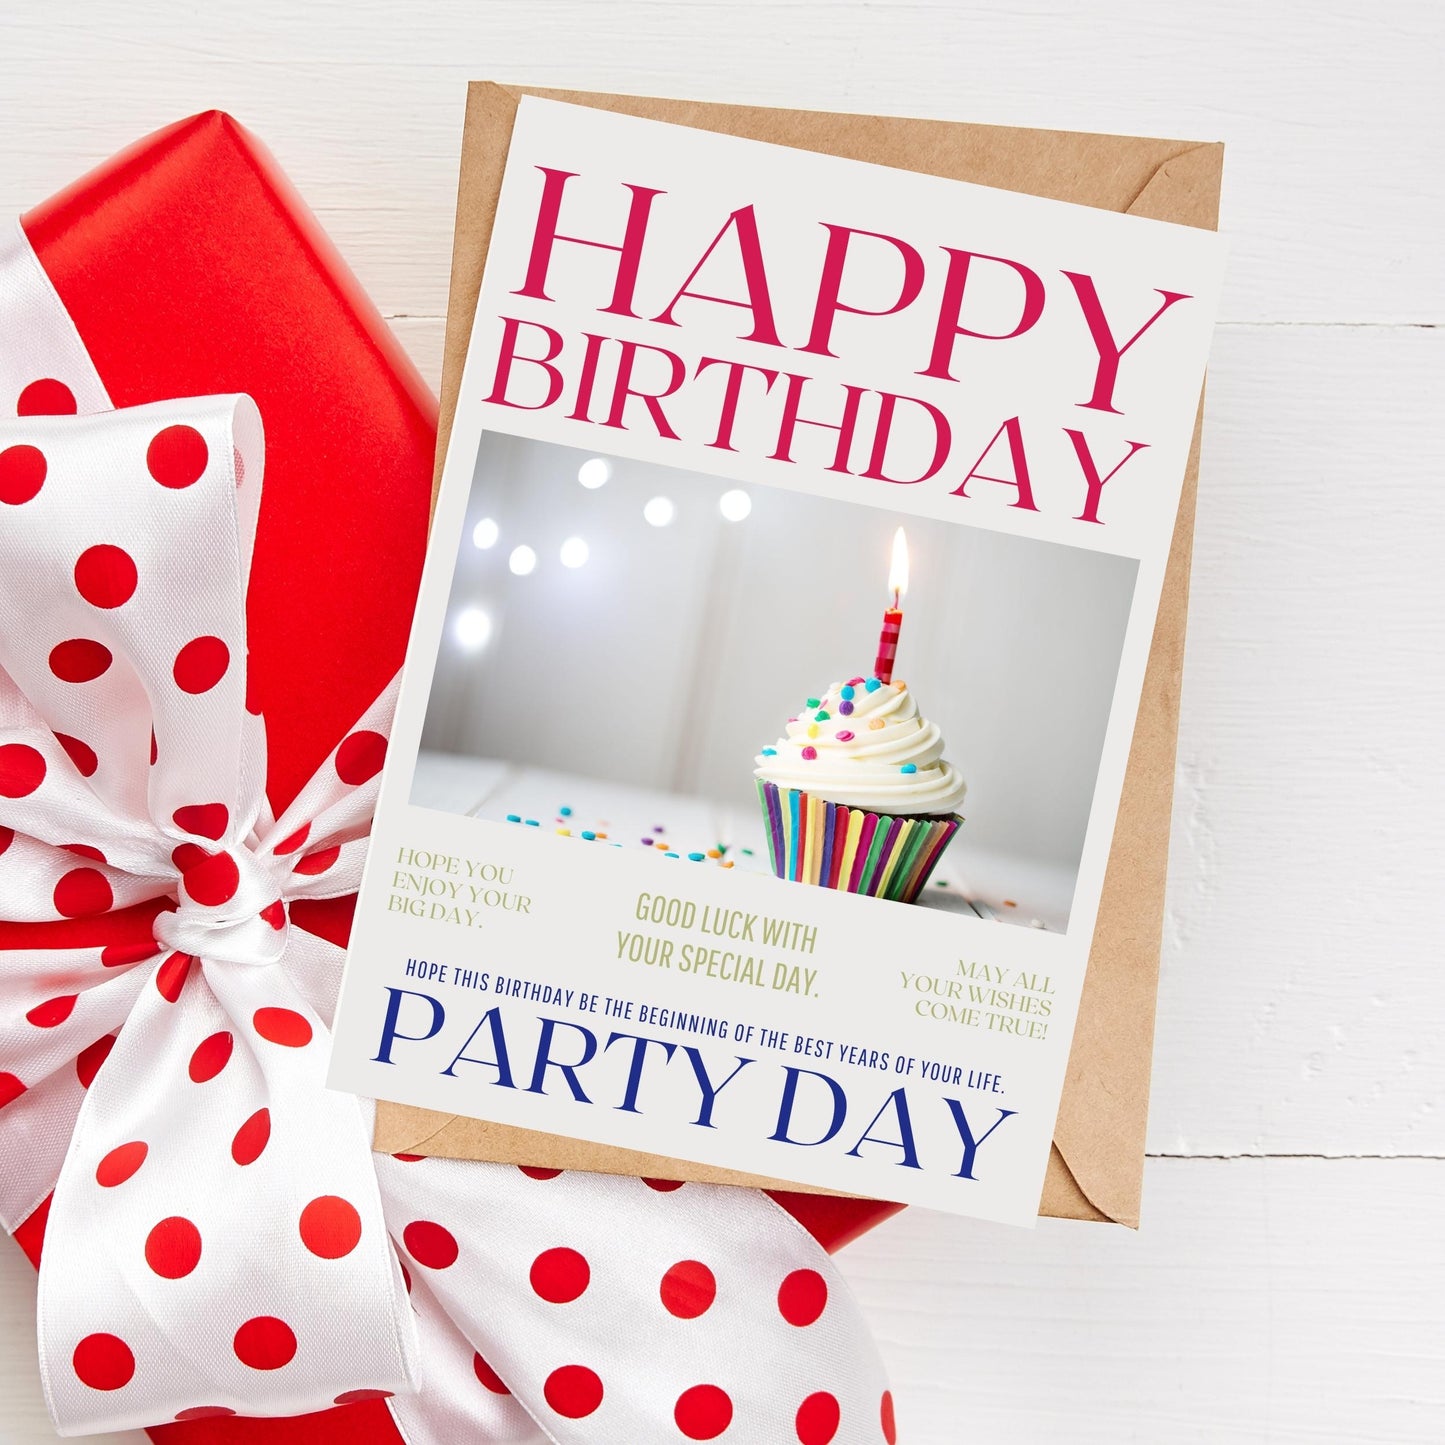 printable birthday cards to color for boyfriend